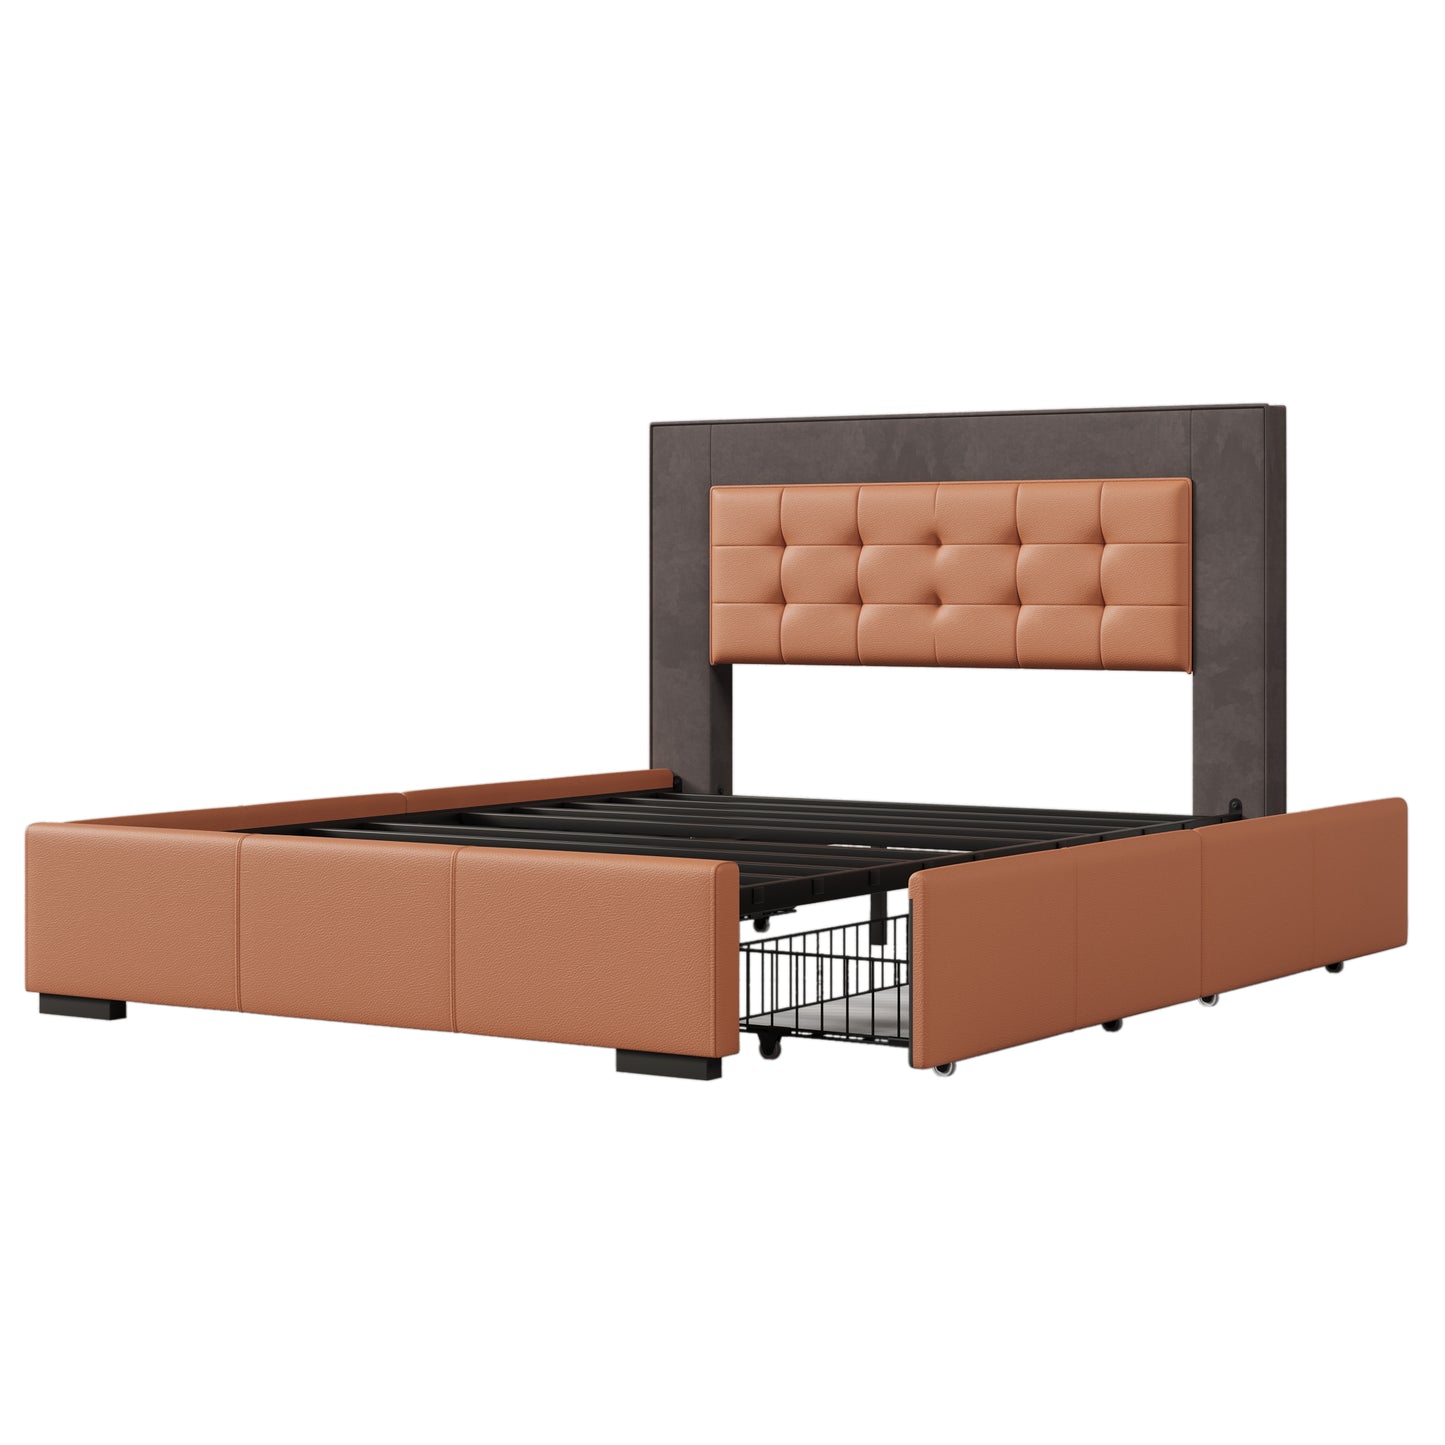 Modern Style Upholstered Queen Platform Bed Frame with Four Drawers, Button Tufted Headboard with PU Leather and Velvet, Two Color, Orange and Brown